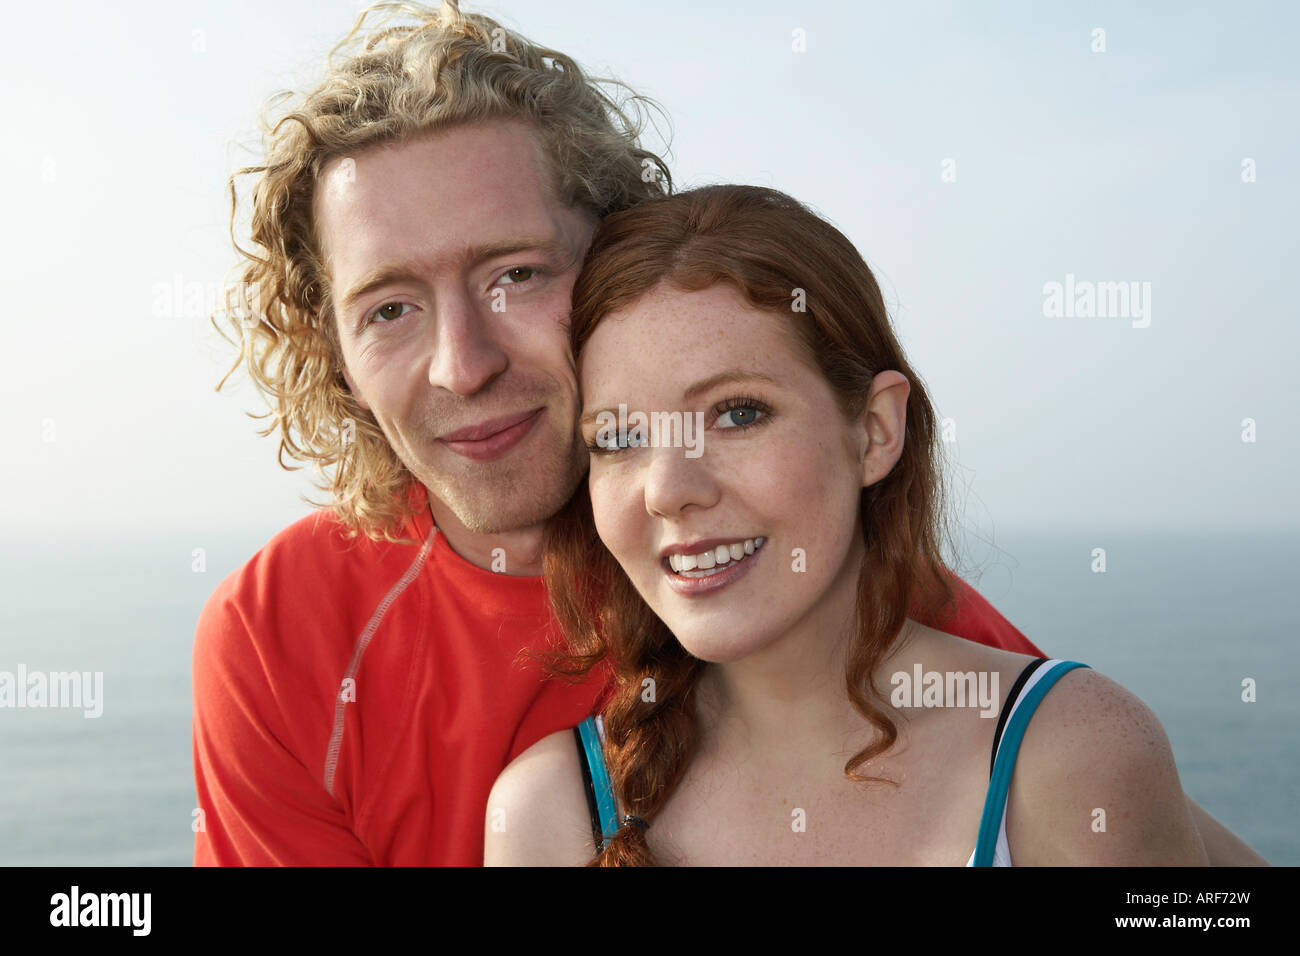 Portrait of a young man and Woman Stock Photo